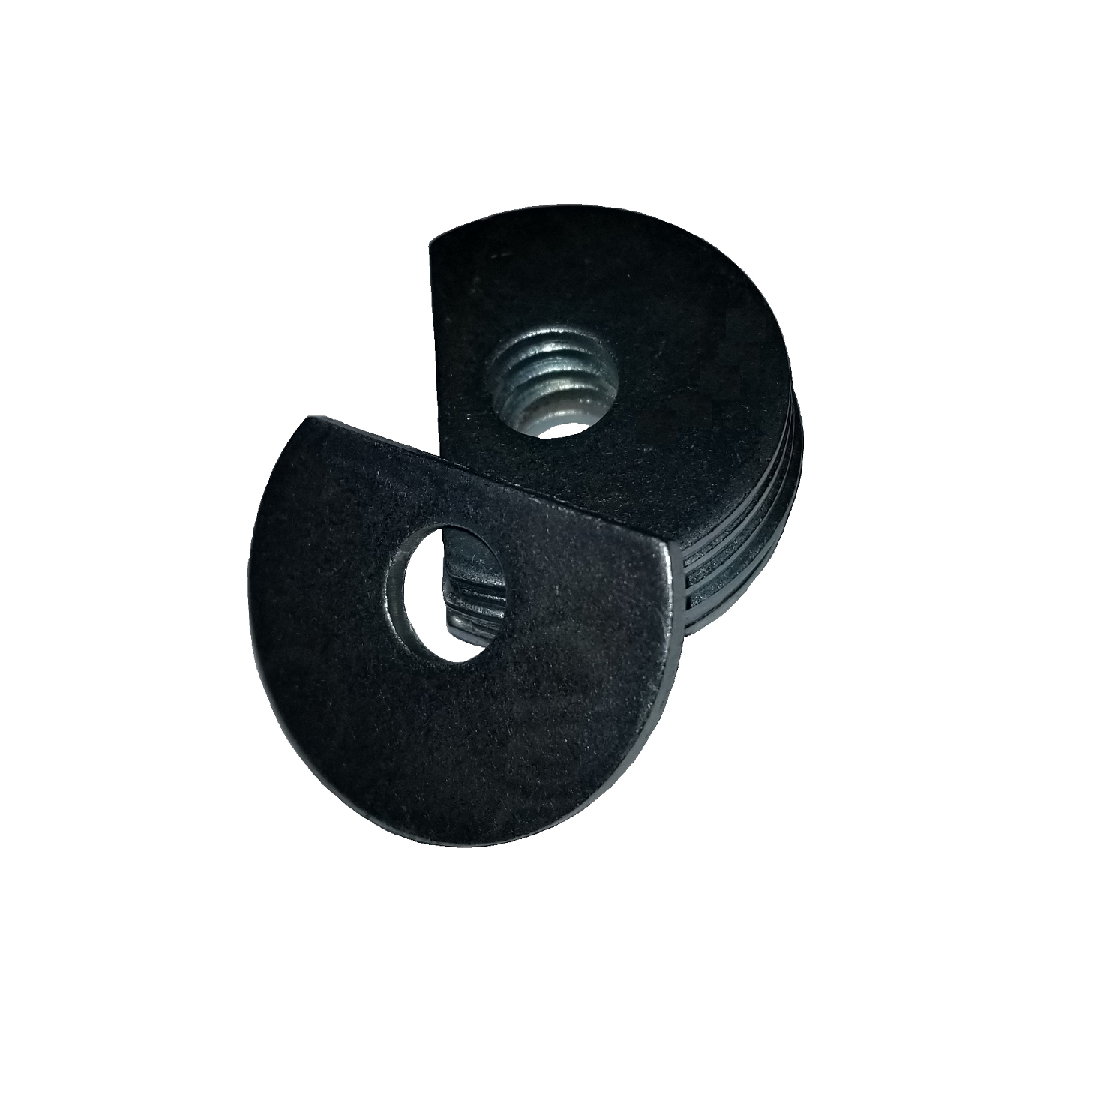 Clipped OD Washer - 0.656 ID, 1.760 OD, 0.125 Thick, Low Carbon Steel - Soft, Zinc & Clear